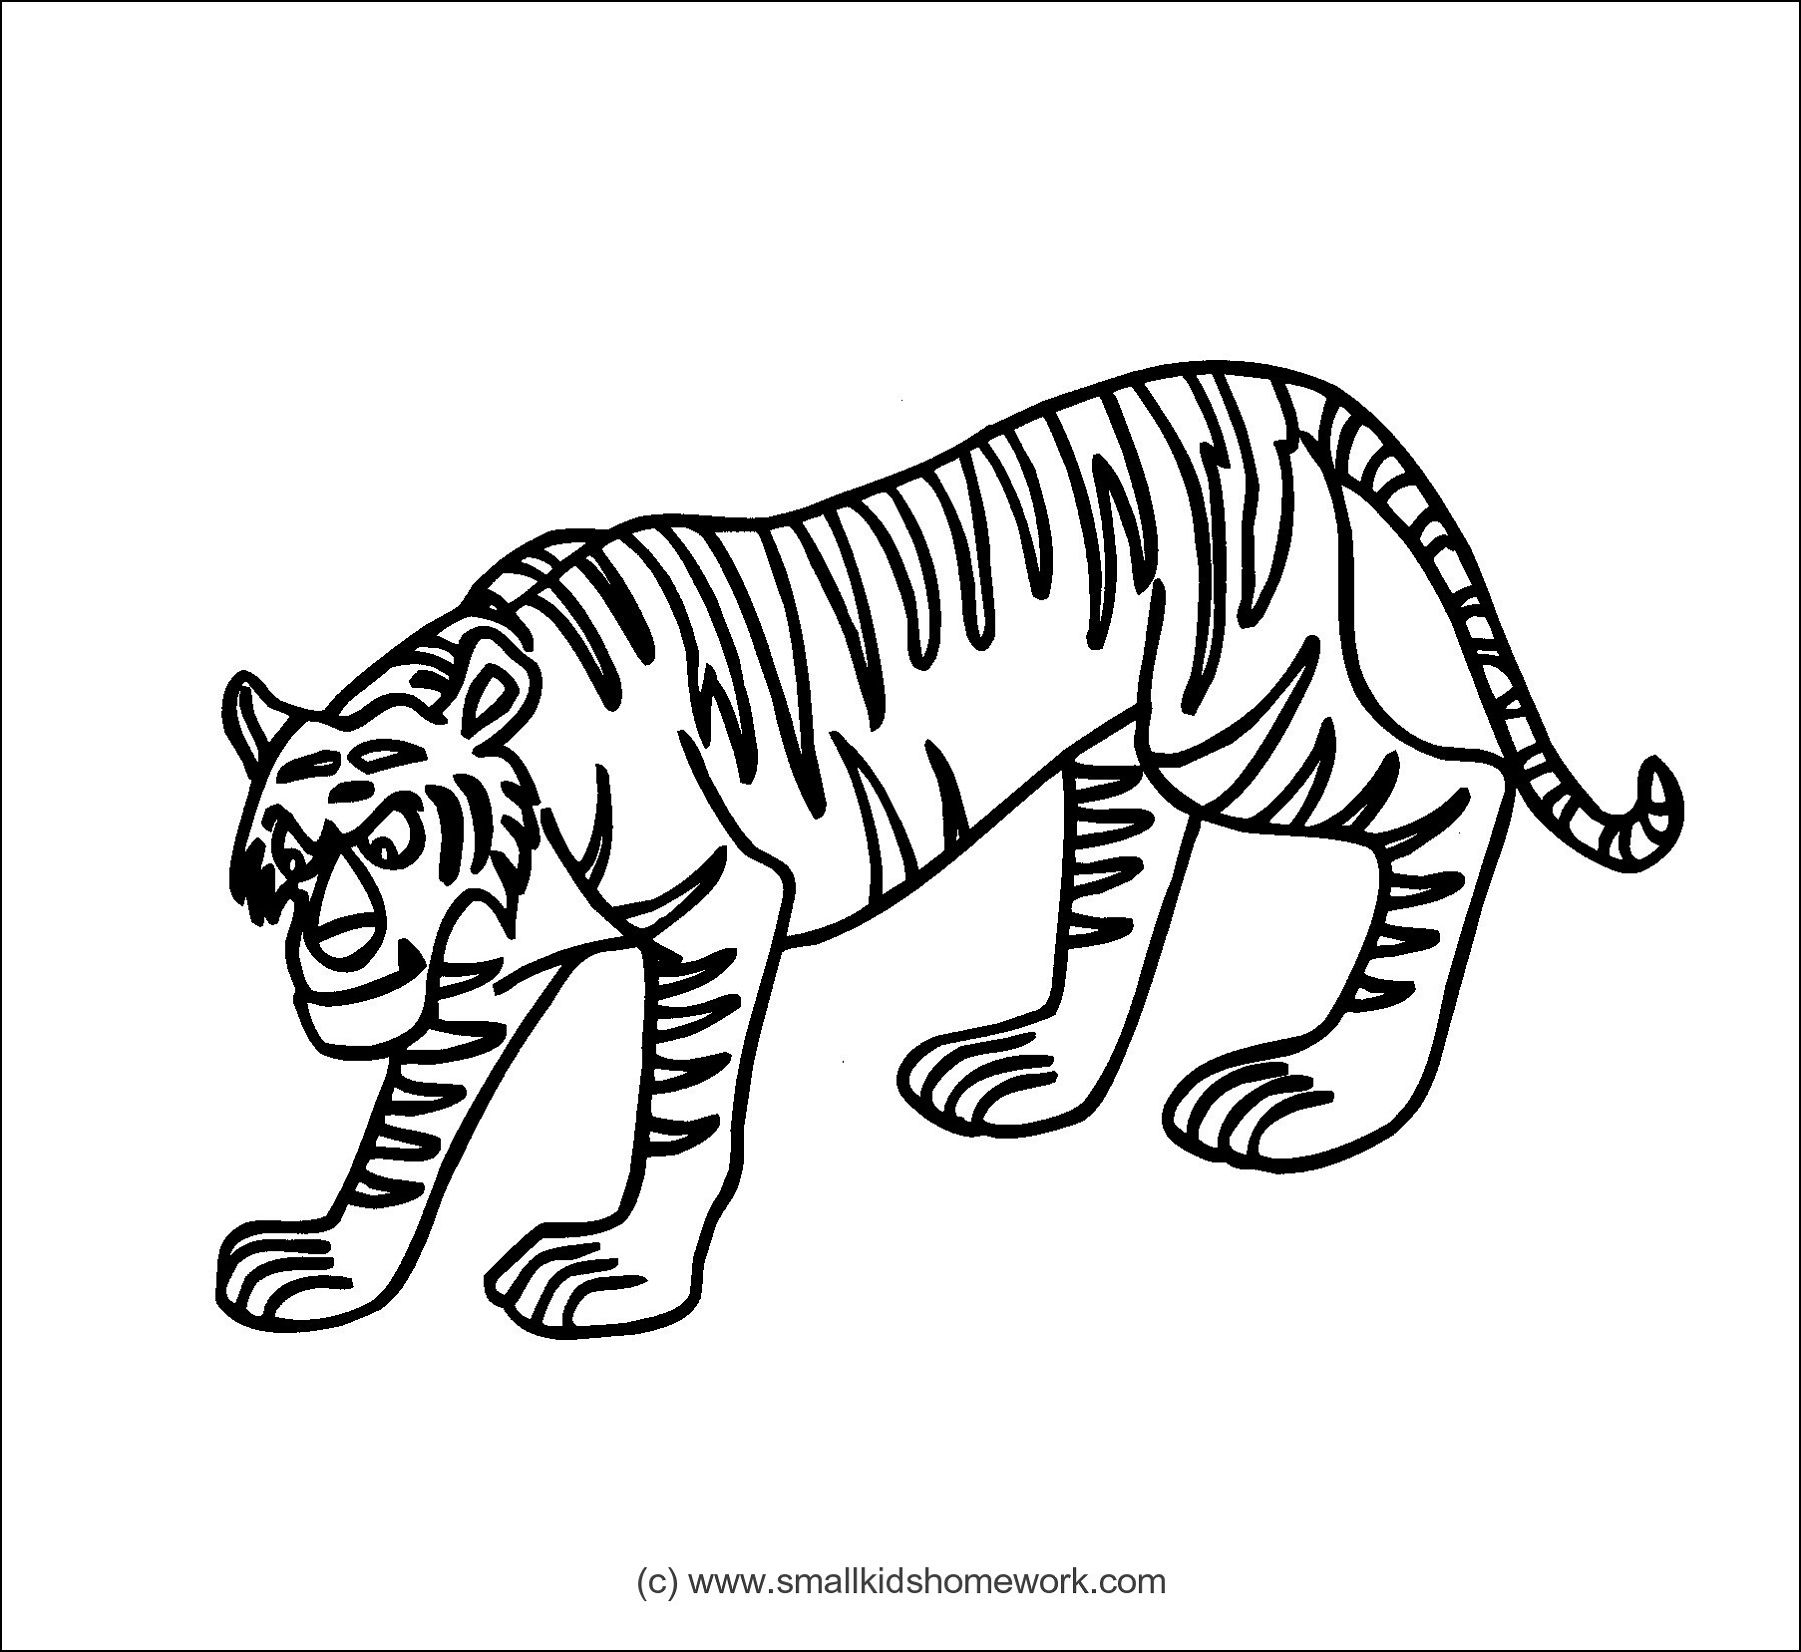 Tiger Outline - Coloring Home